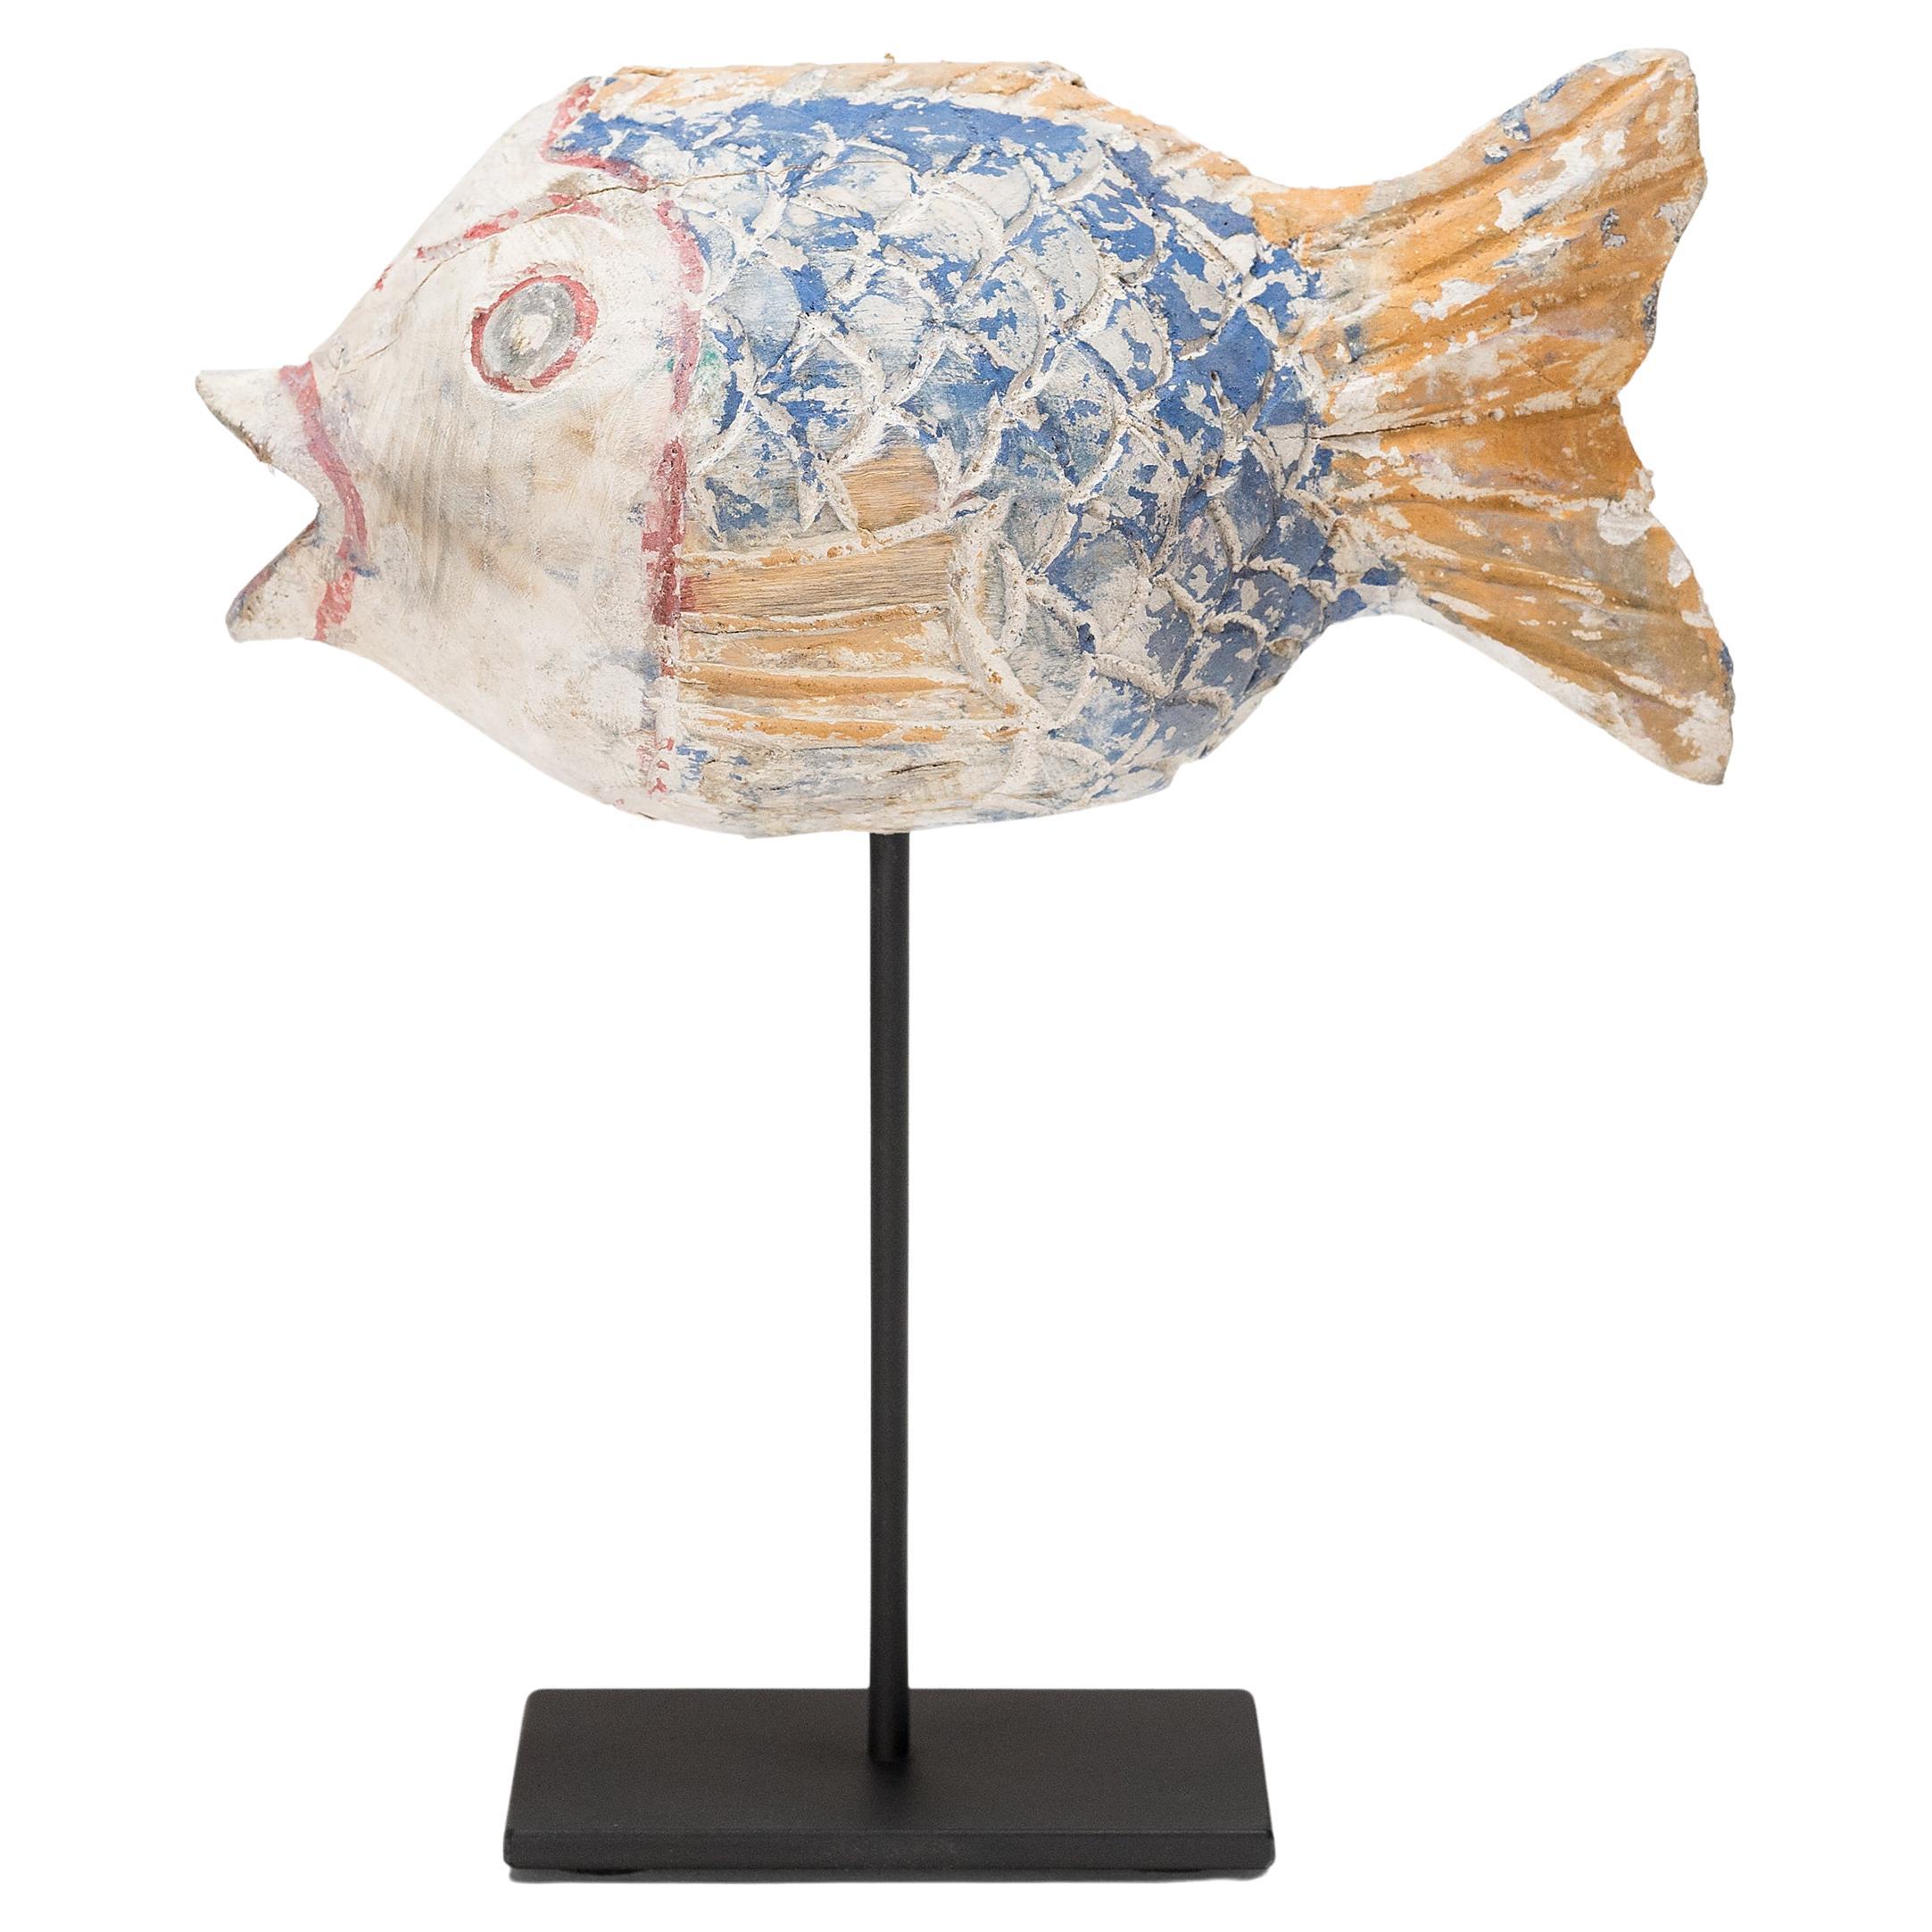 Chinese Polychrome Lucky Fish